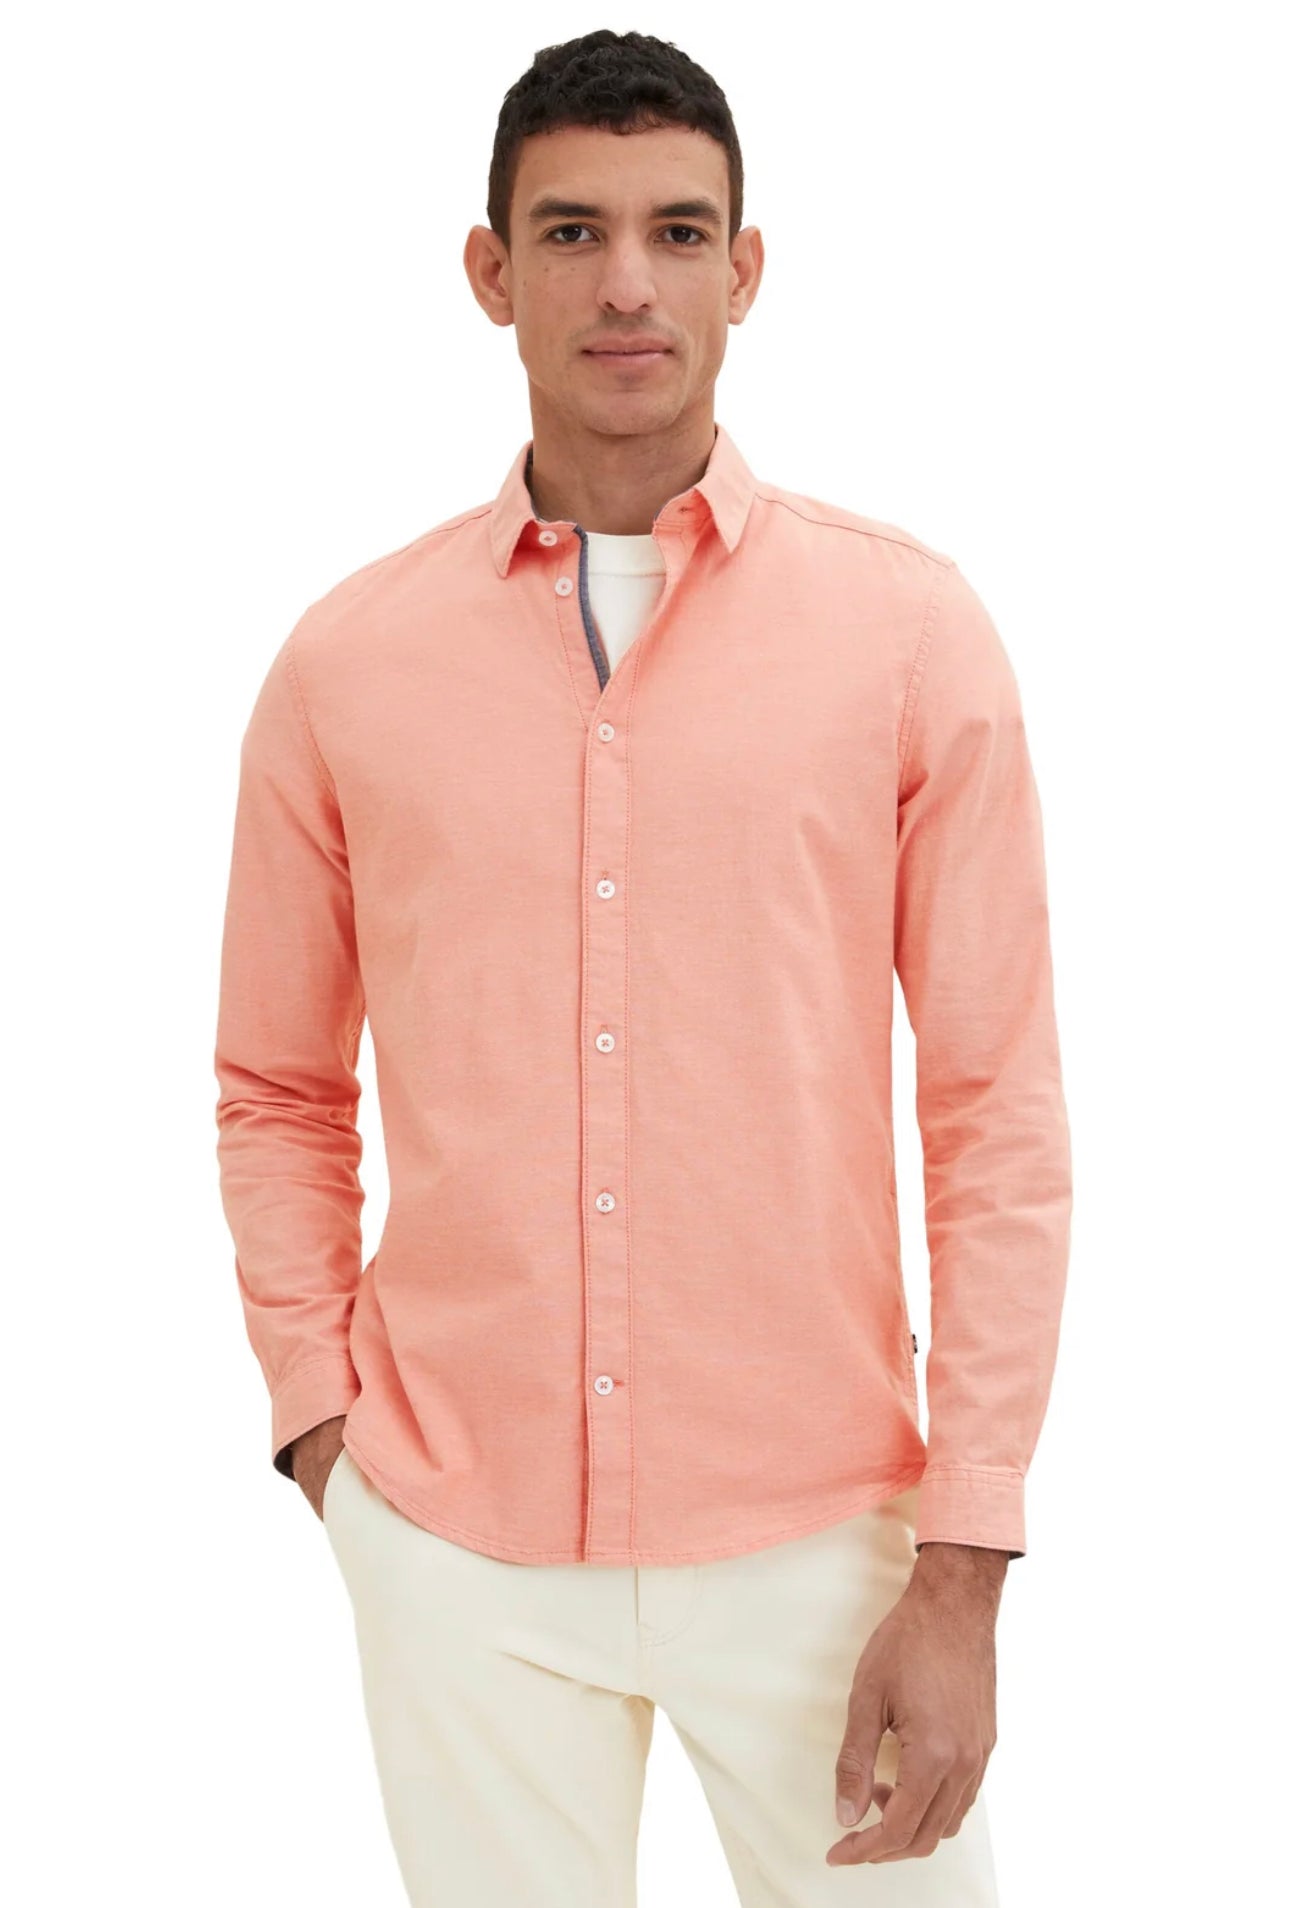 STEEL Oxford Shirt STYLE – Fitted GARAGE Stretch